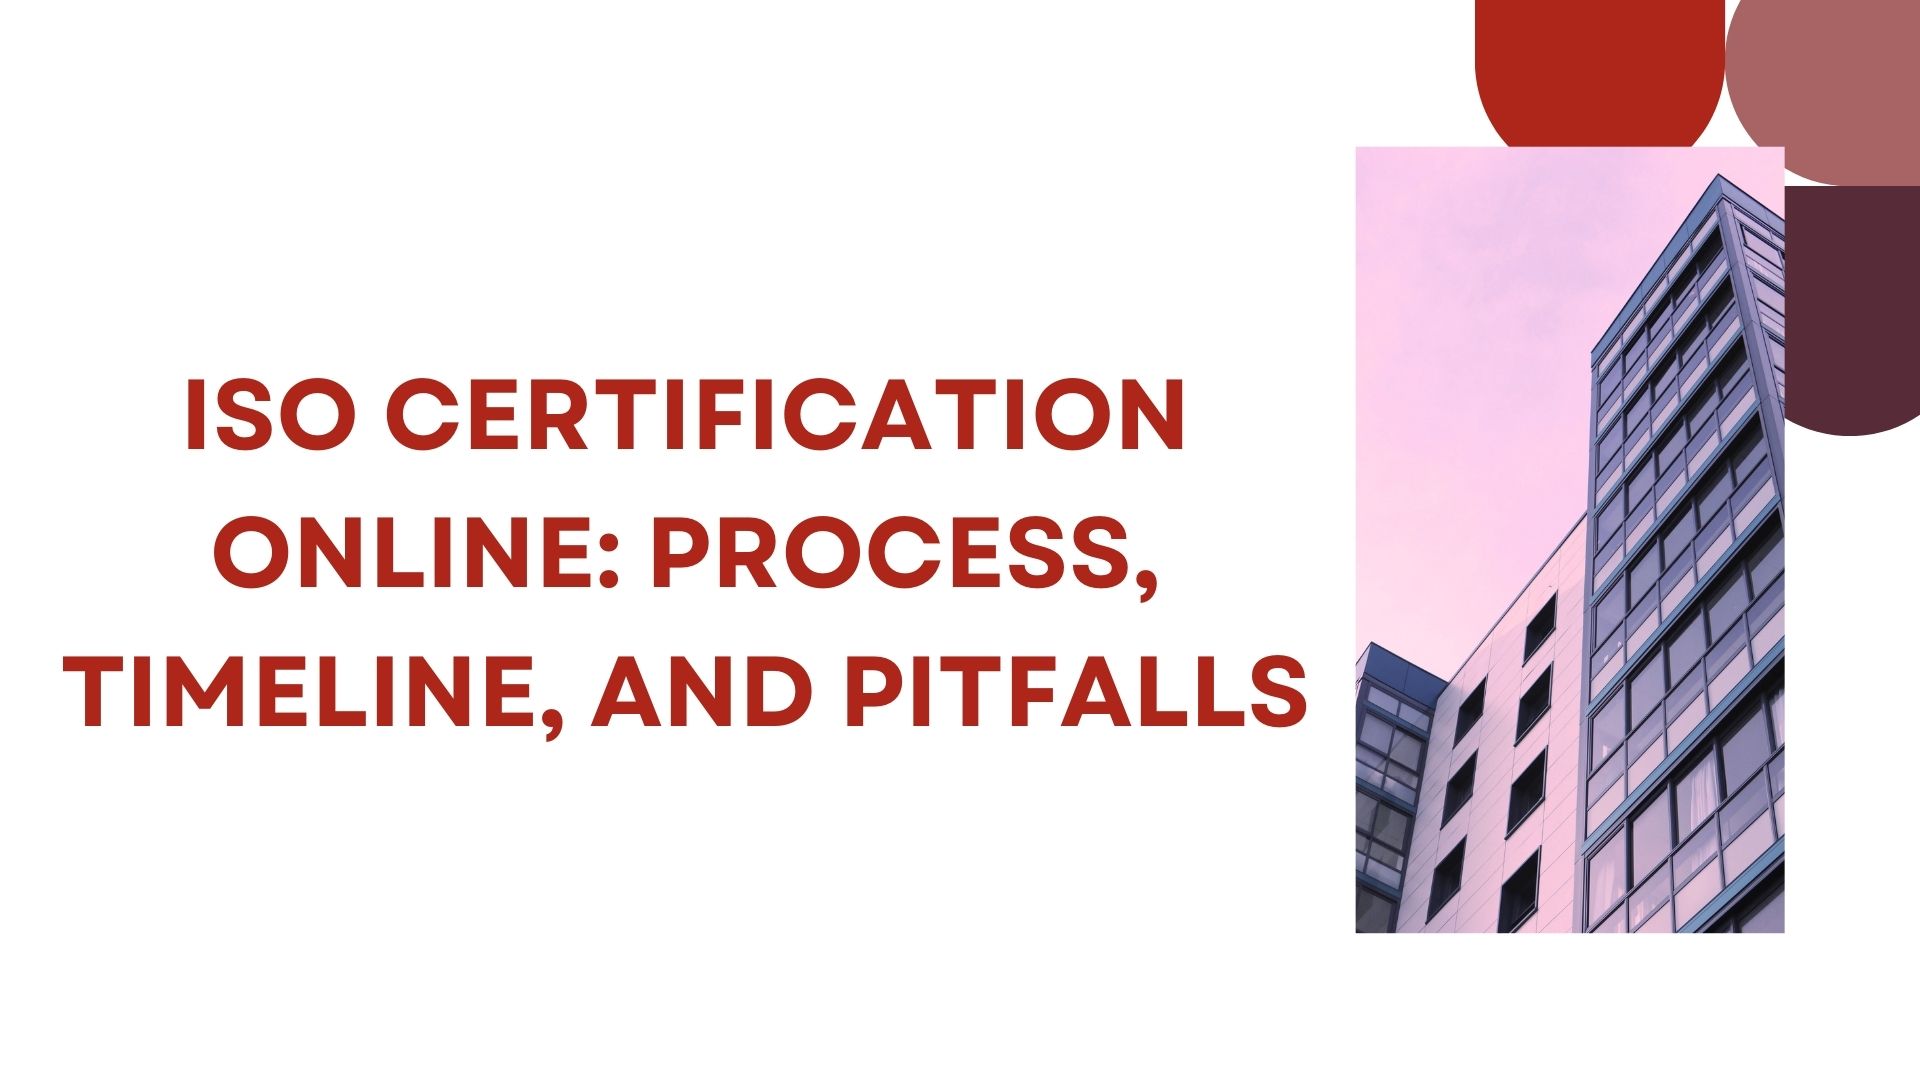 ISO Certification Online: Process, Timeline, and Pitfalls